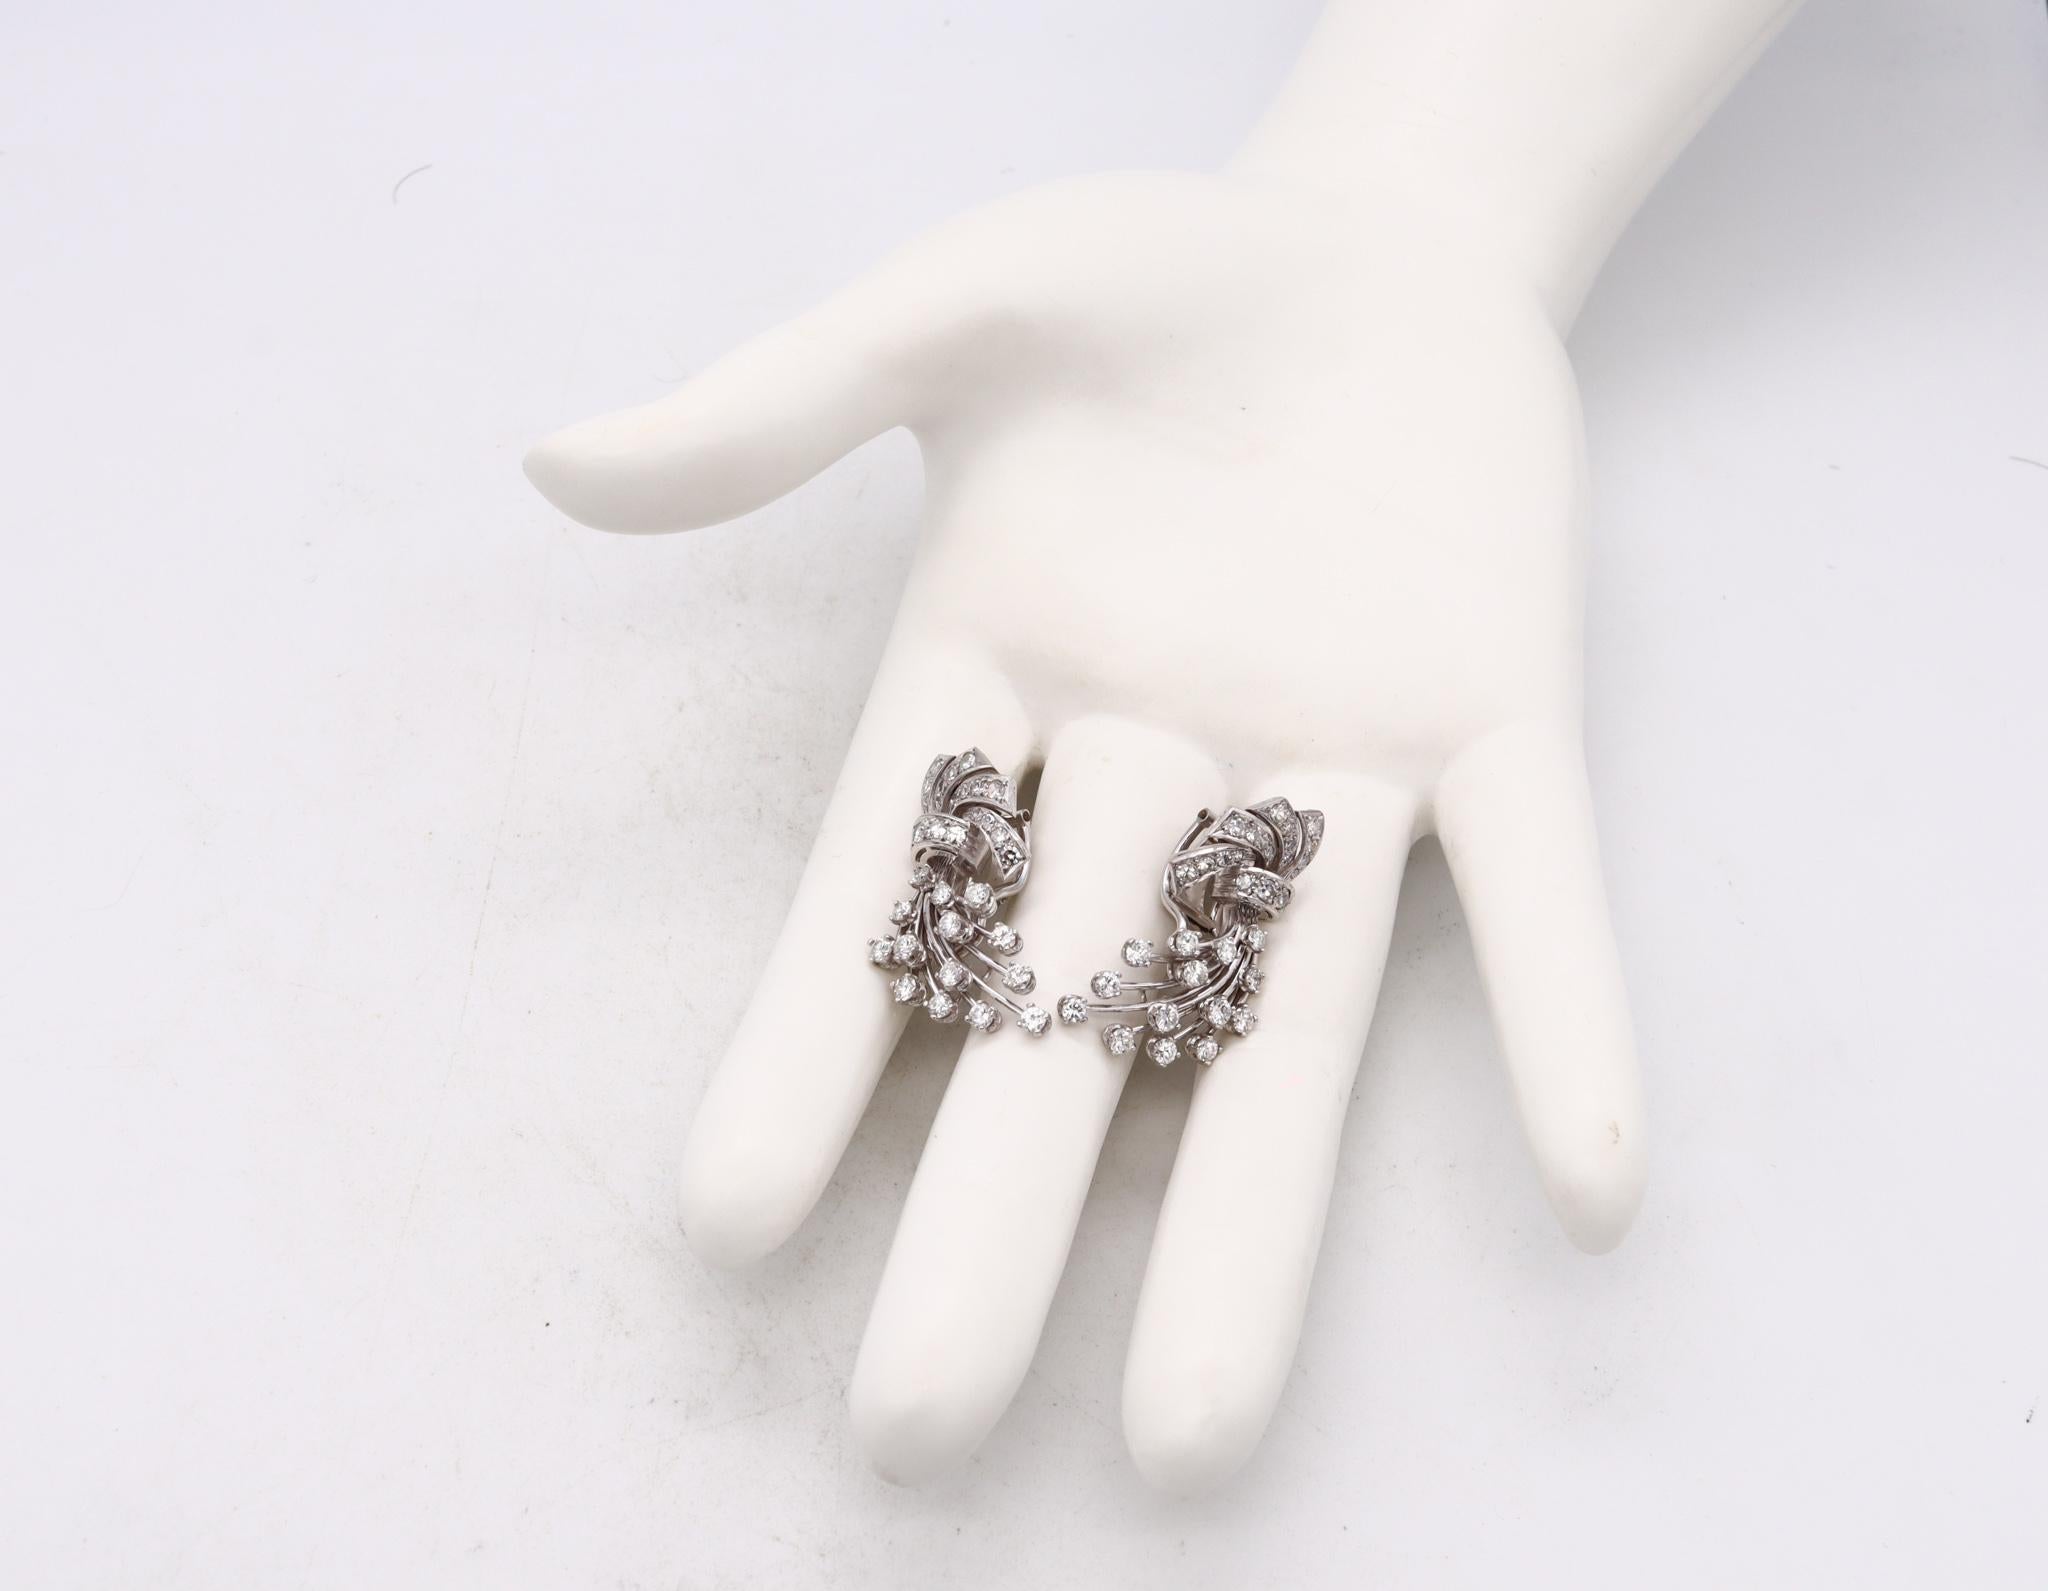 An Art Deco pair of jeweled clips on earrings in platinum.

Very handsome vintage pieces from the American art-deco period, circa 1930-1940. This jeweled pair of earrings was carefully crafted in solid .900/.999 platinum, with .100/.999 iridium. The